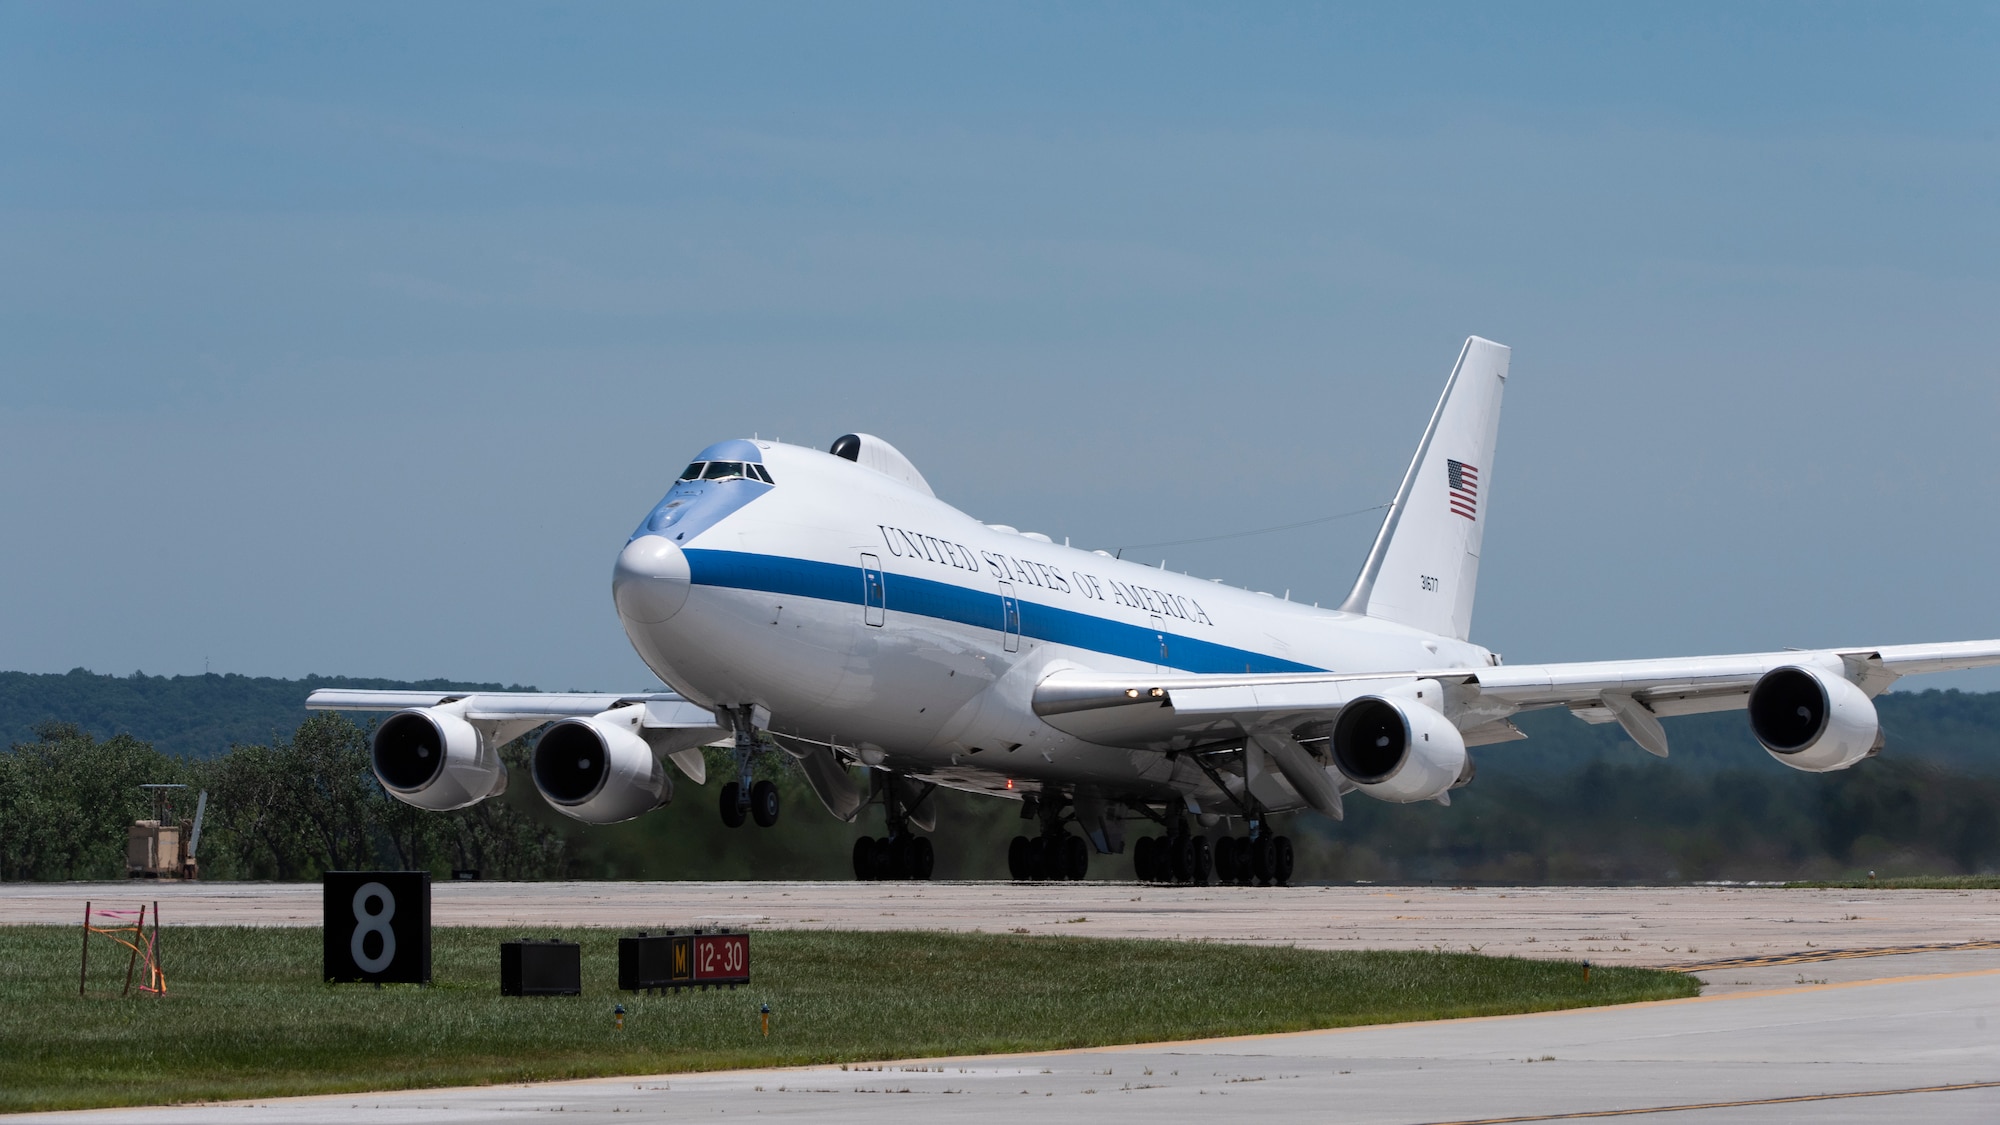 A U.S. Air Force E-4B National Airborne Operations Center aircraft takes off from Offutt Air Force Base, Nebraska, July 10, 2019. The E-4B is protected against the effects of an electromagnetic pulse and has an electrical system designed to support advanced electronics and a wide variety of communications equipment. (U.S. Air Force photo by Staff Sgt. Jacob Skovo)